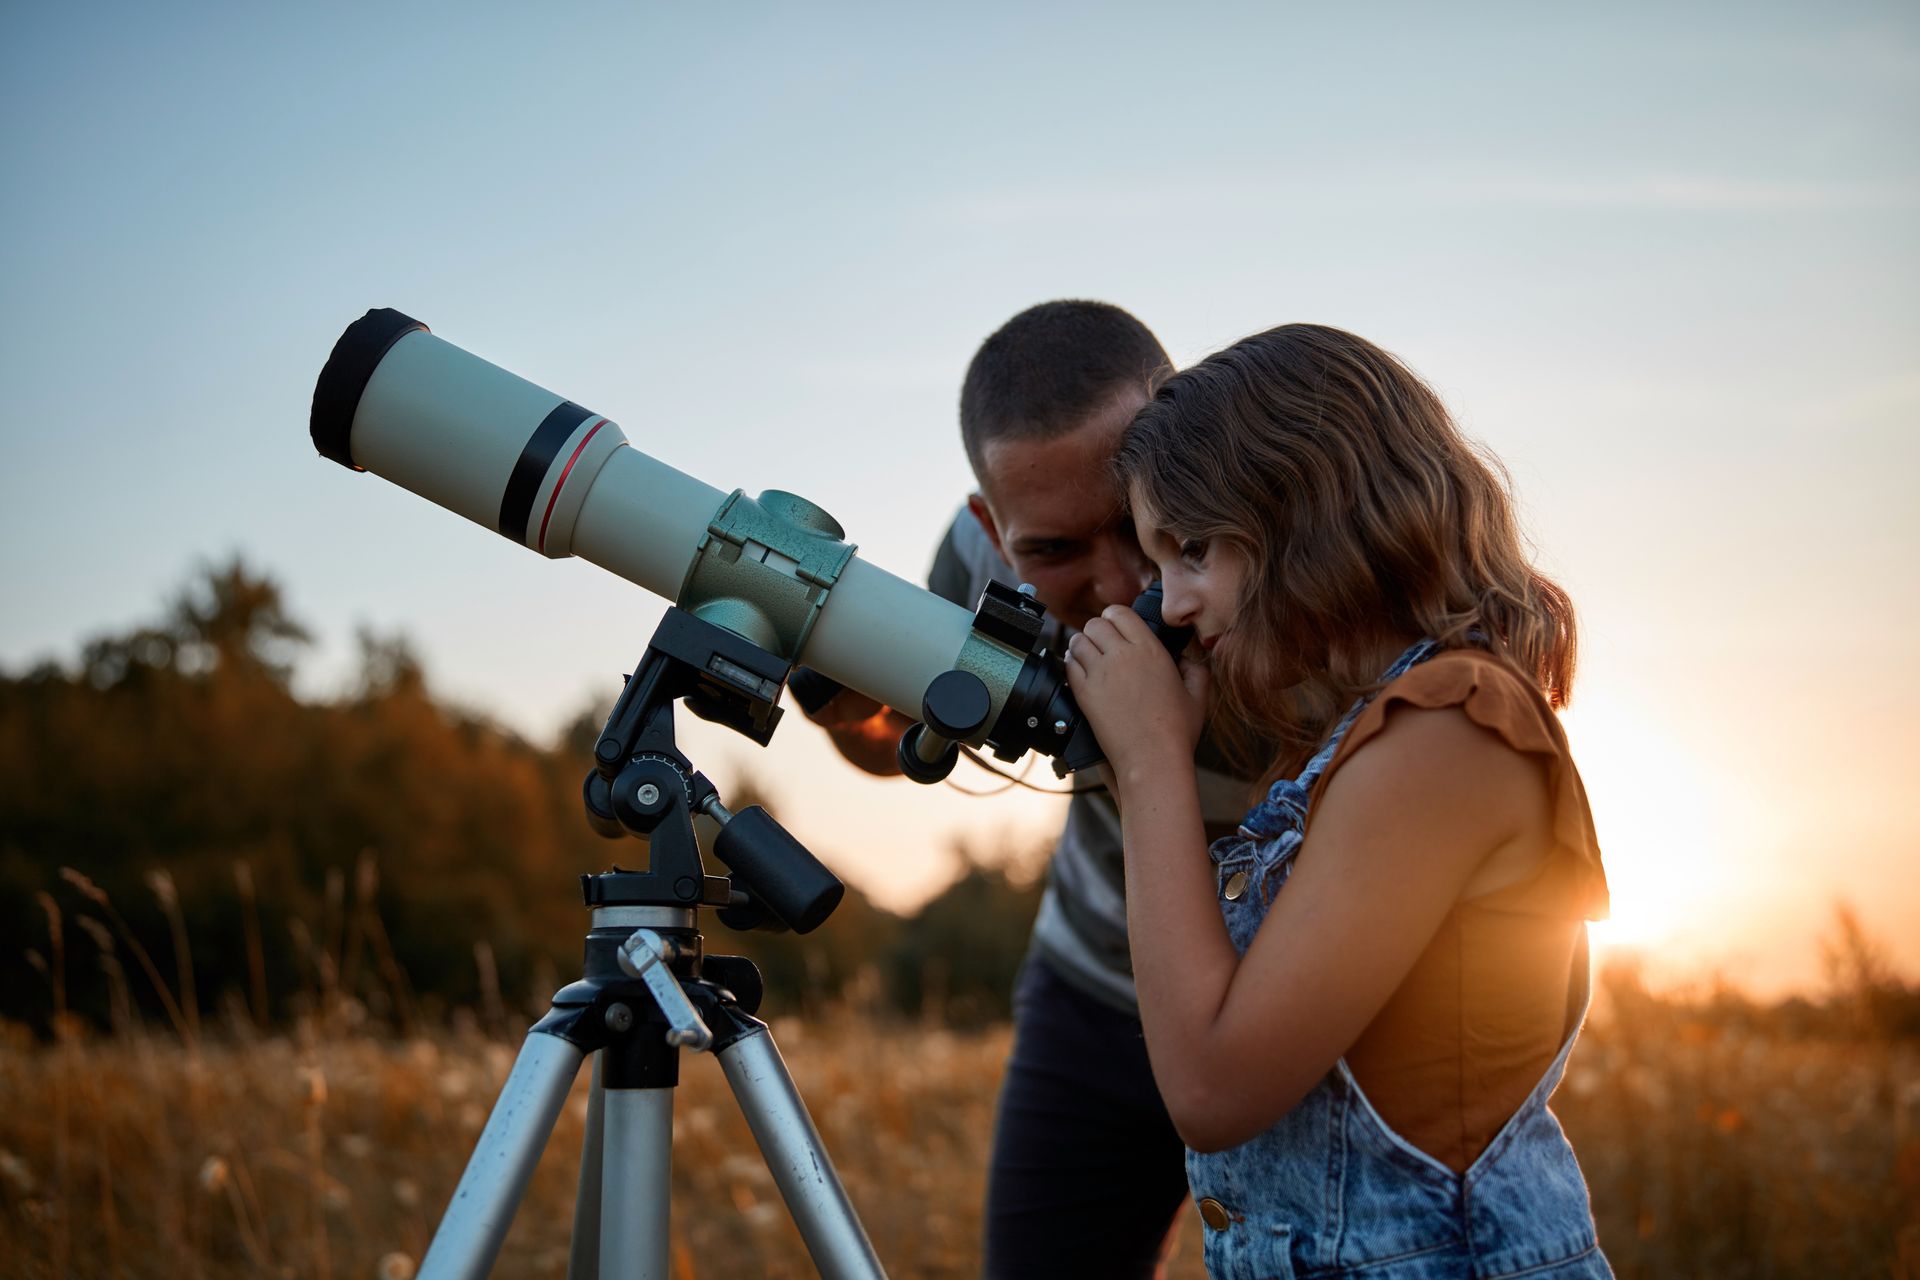 A man and a woman are looking through a telescope in a field.